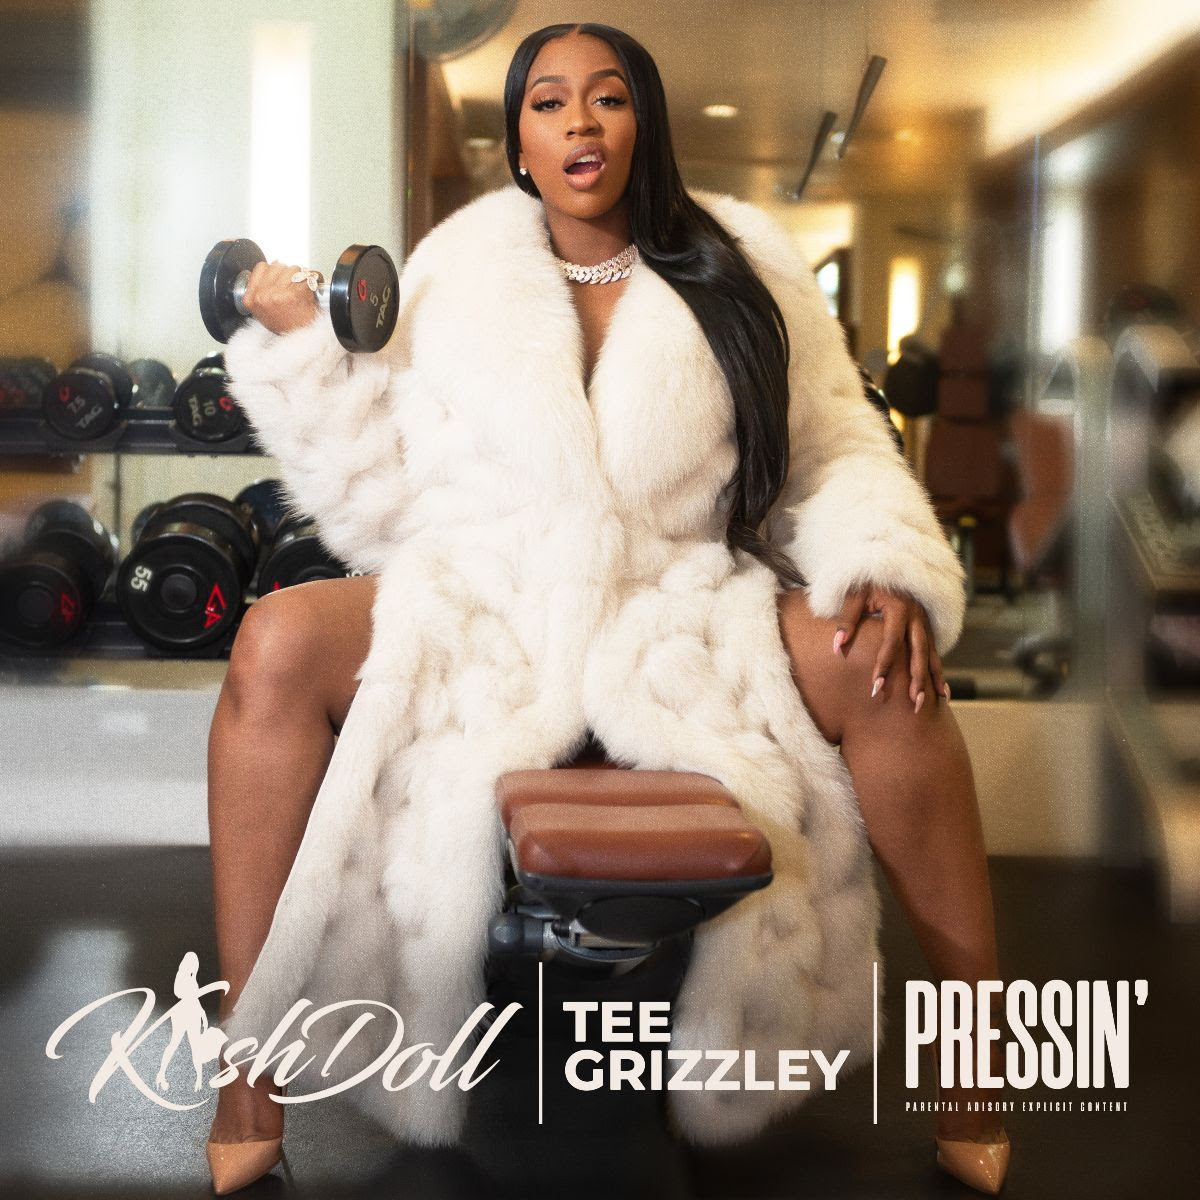 Kash Doll Unleashes Fiery New Single “Pressin'” With Tee Grizzley